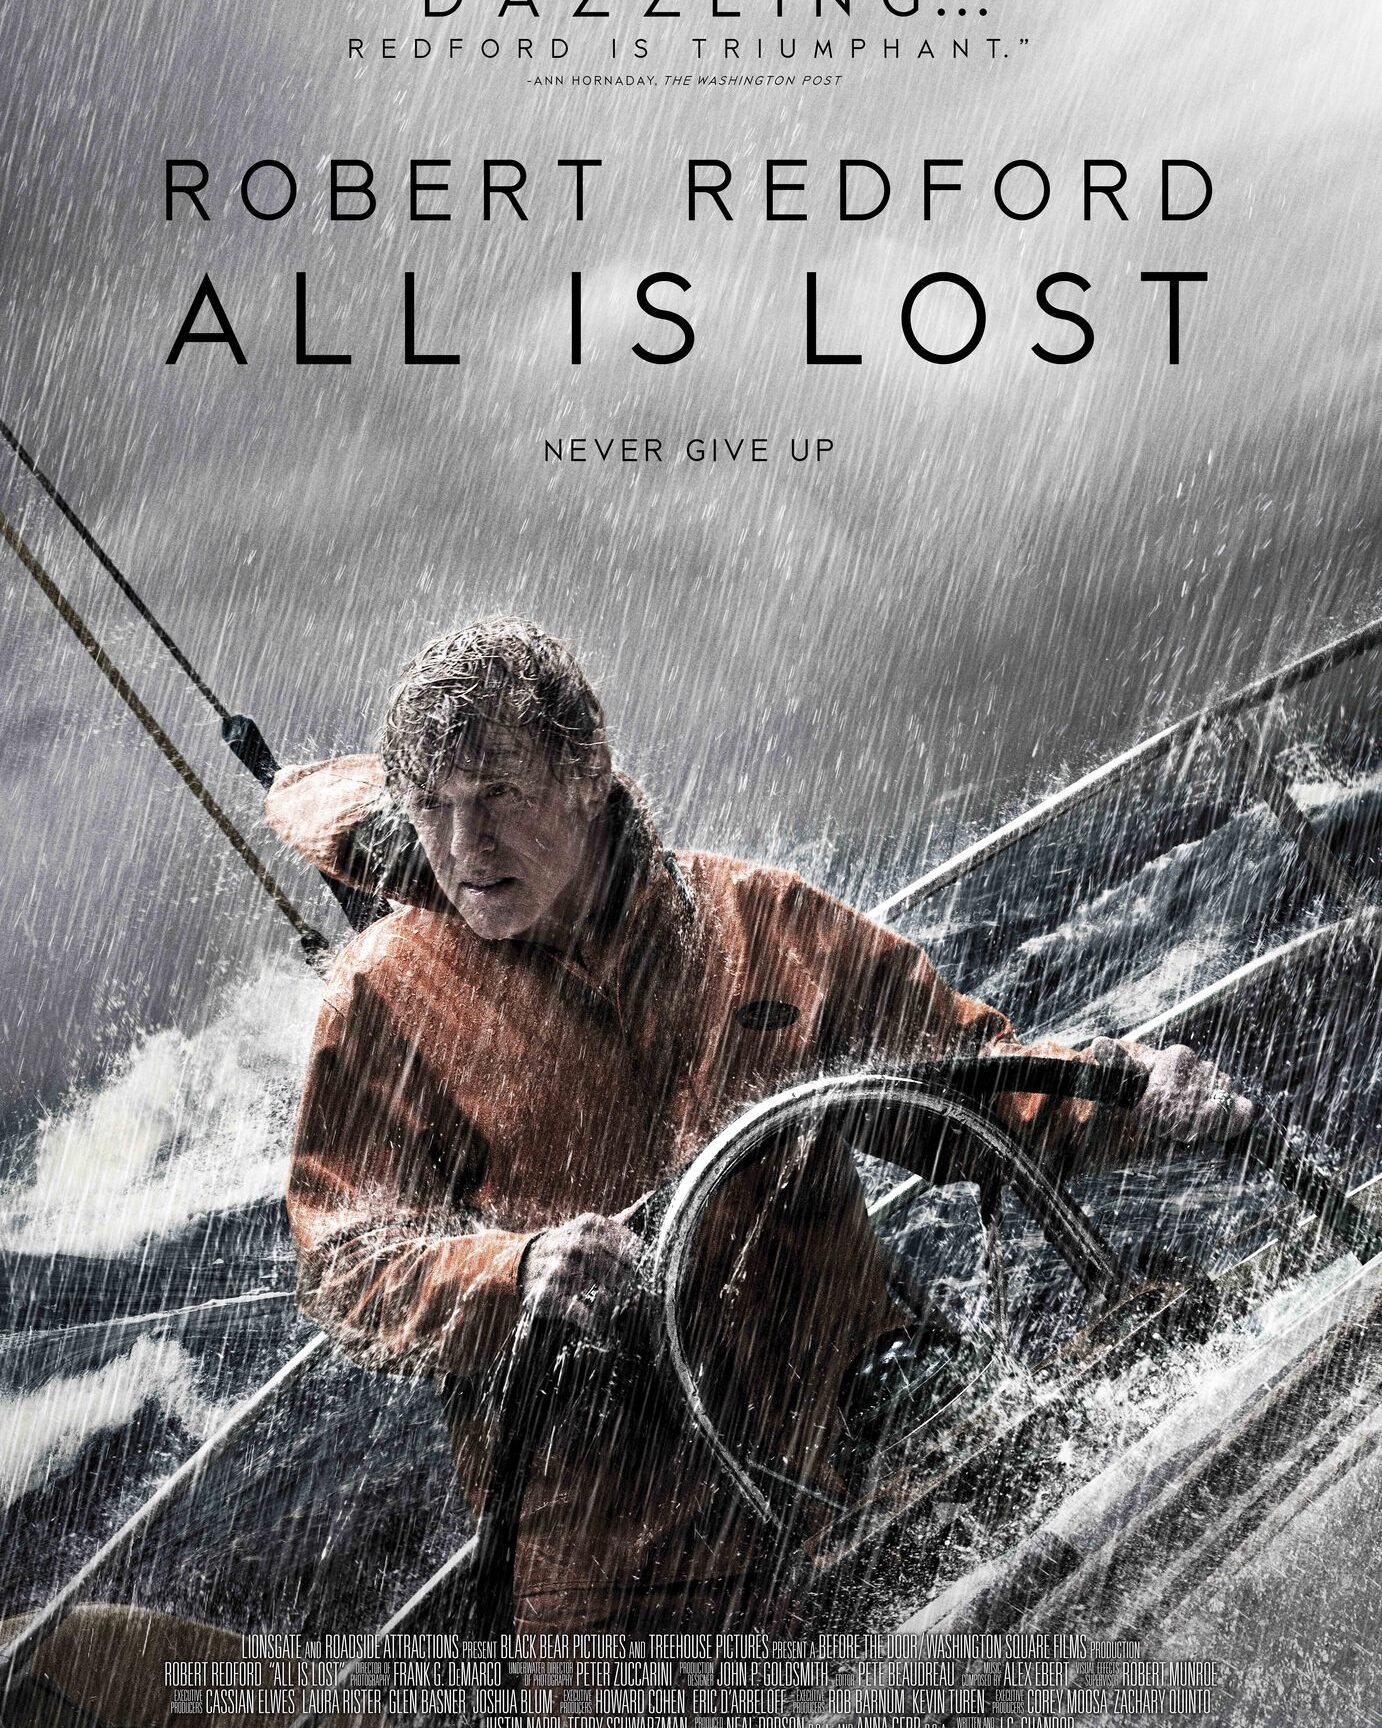 All Is Lost Poster